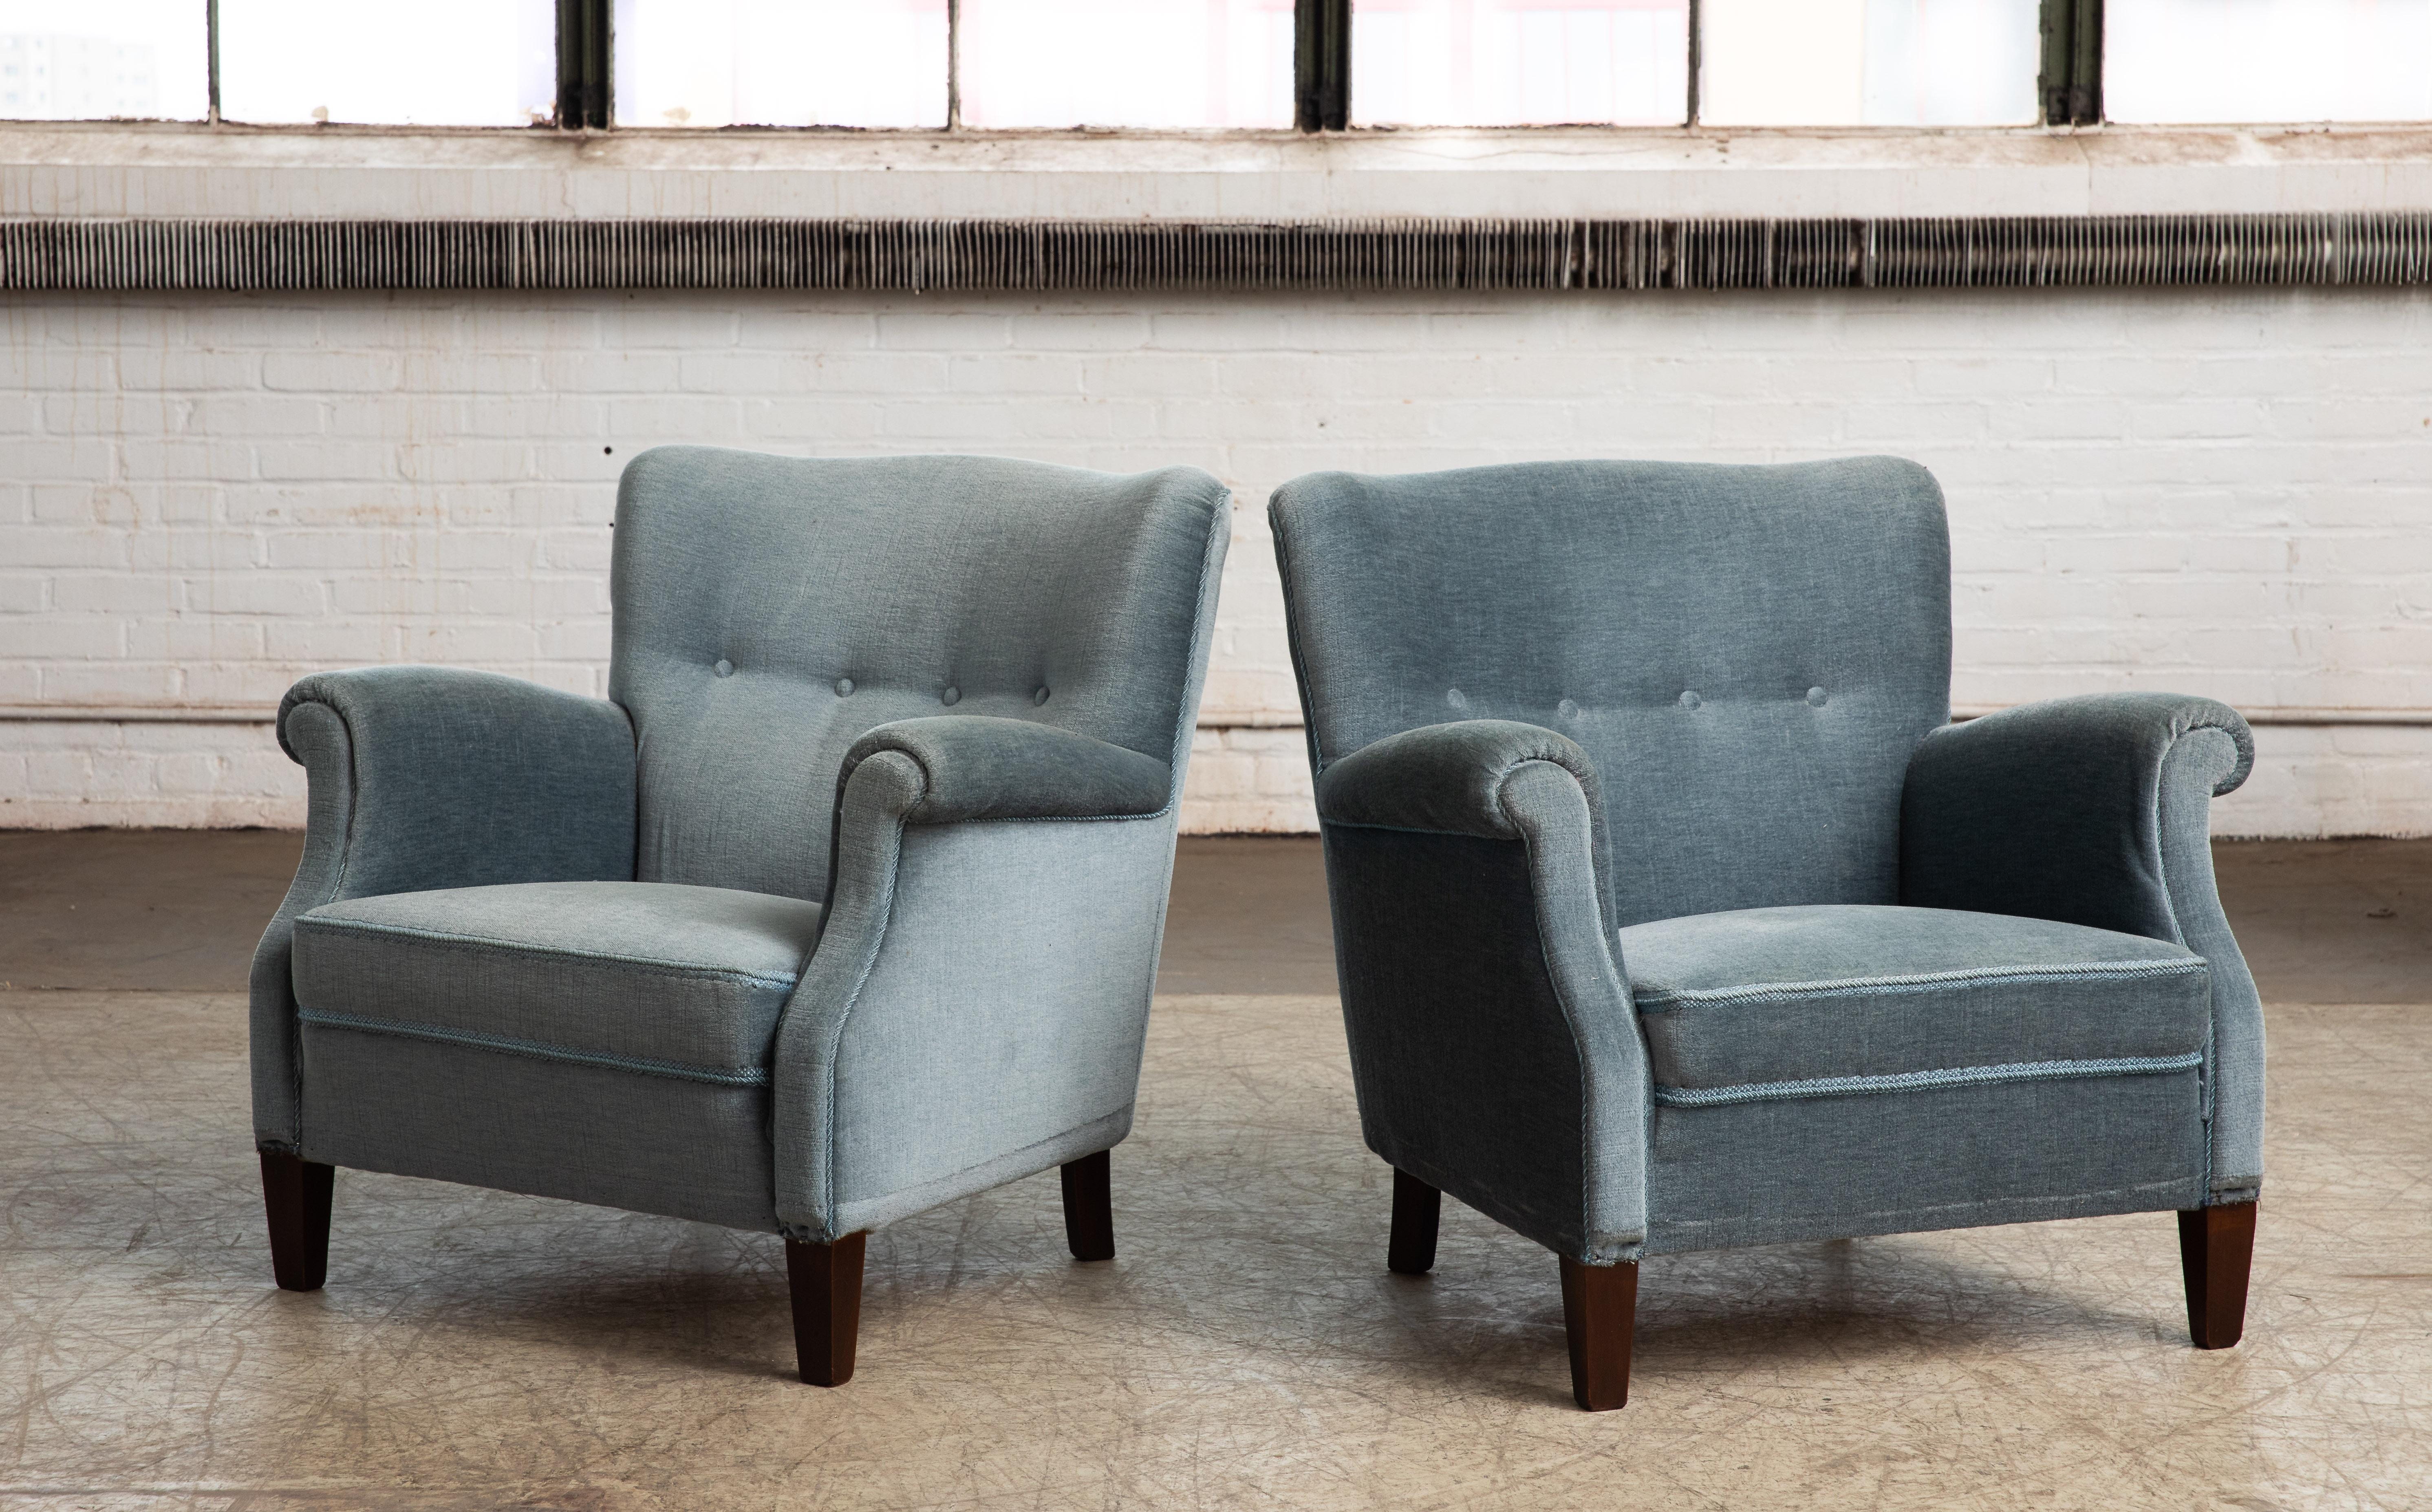 Beautiful pair of 1950s Danish easy chair attributed to Fritz Hansen. Very elegant with their distinct shape, precise lines and harmonious proportions. The size make them very versatile and well suited for today's urban homes. The design is very